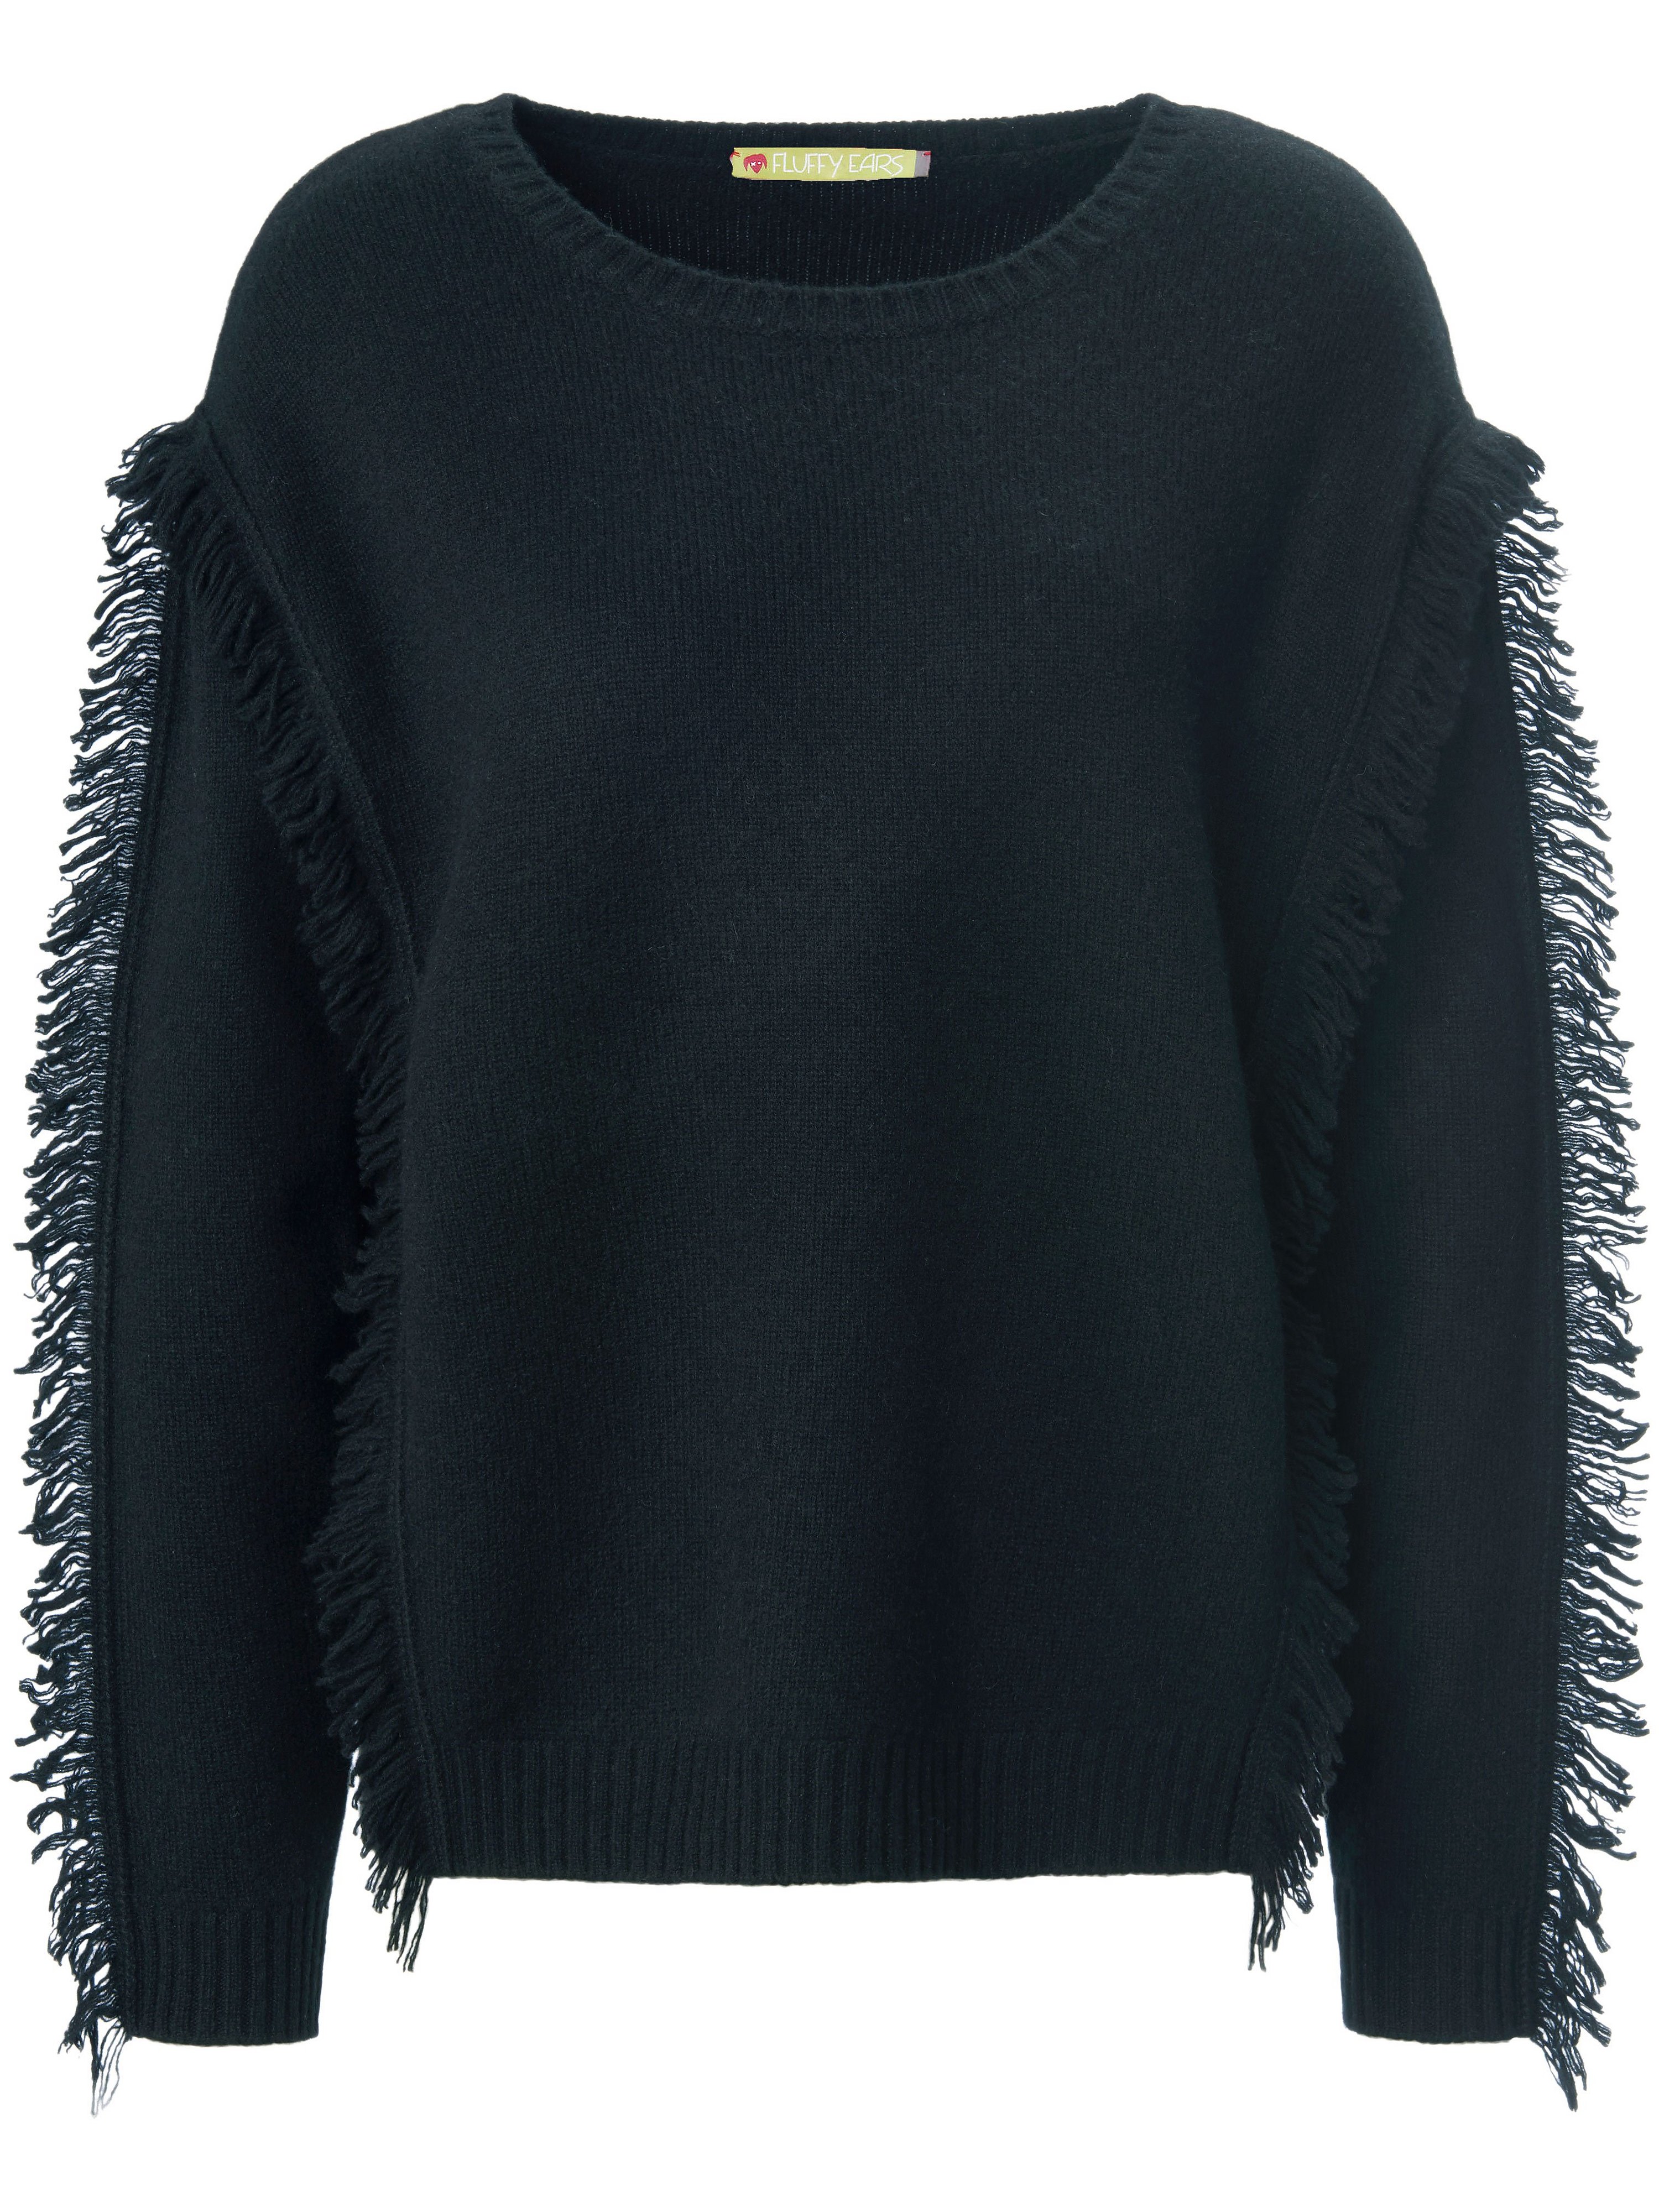 Le pull manches longues  FLUFFY EARS noir taille 40